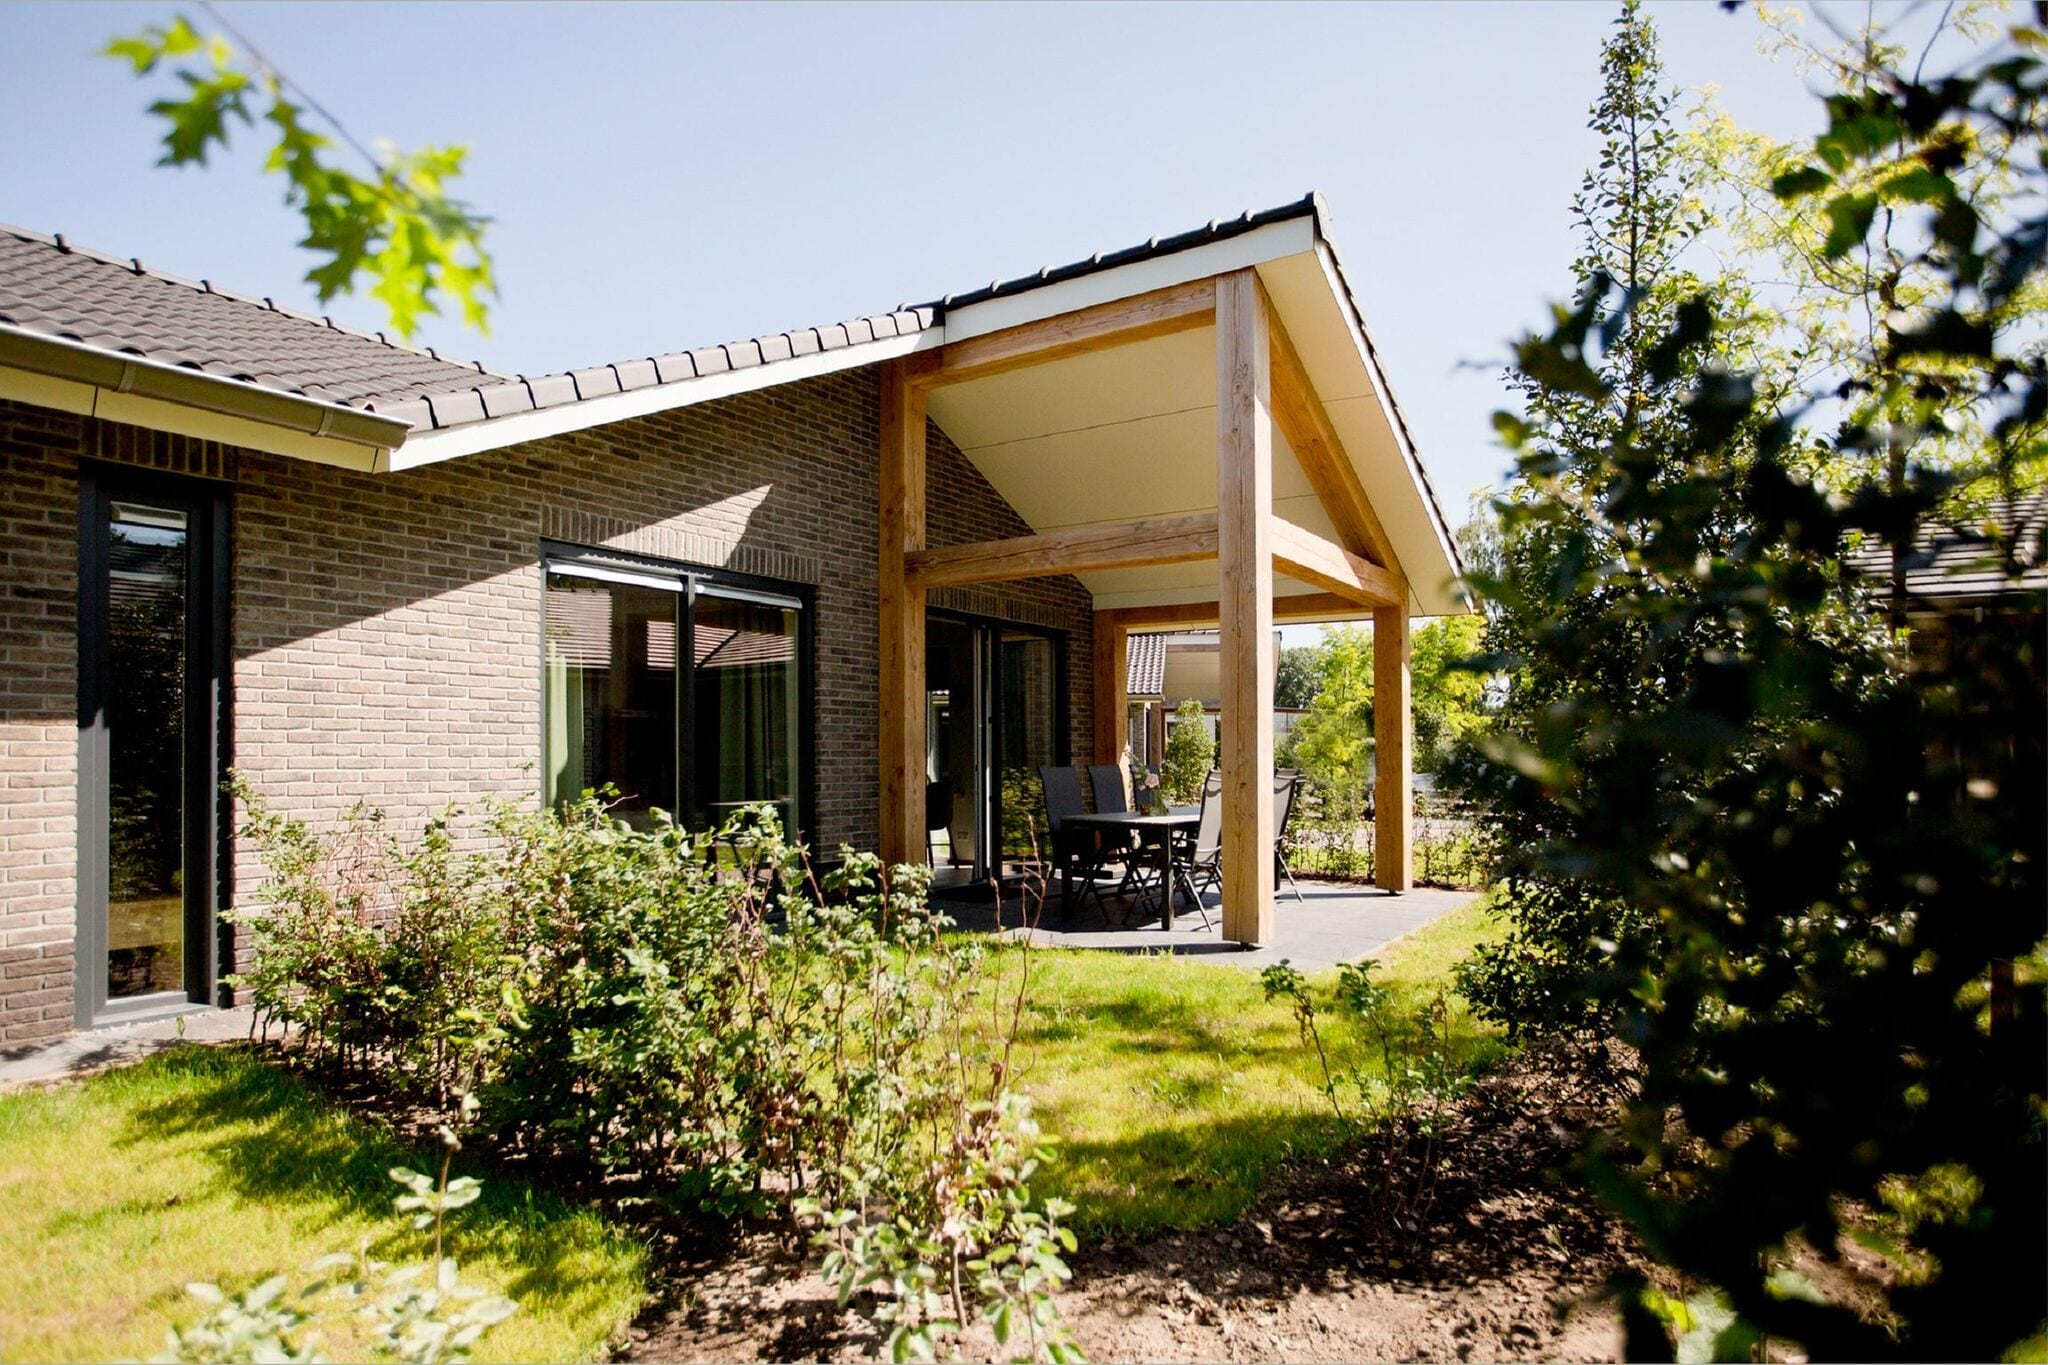 Attractive bungalow with a covered terrace